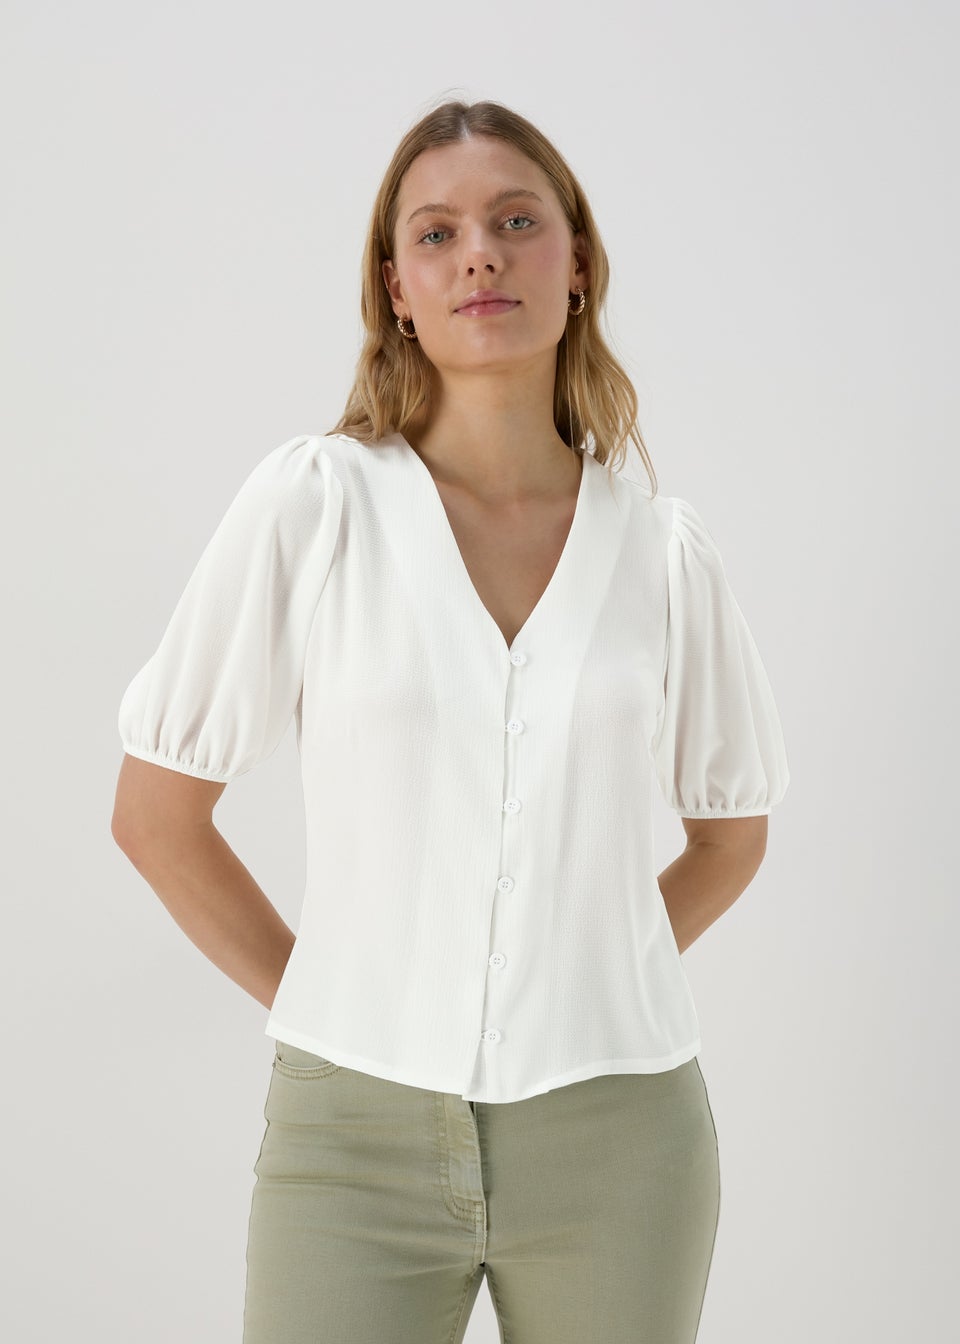 Ivory Blouse Top